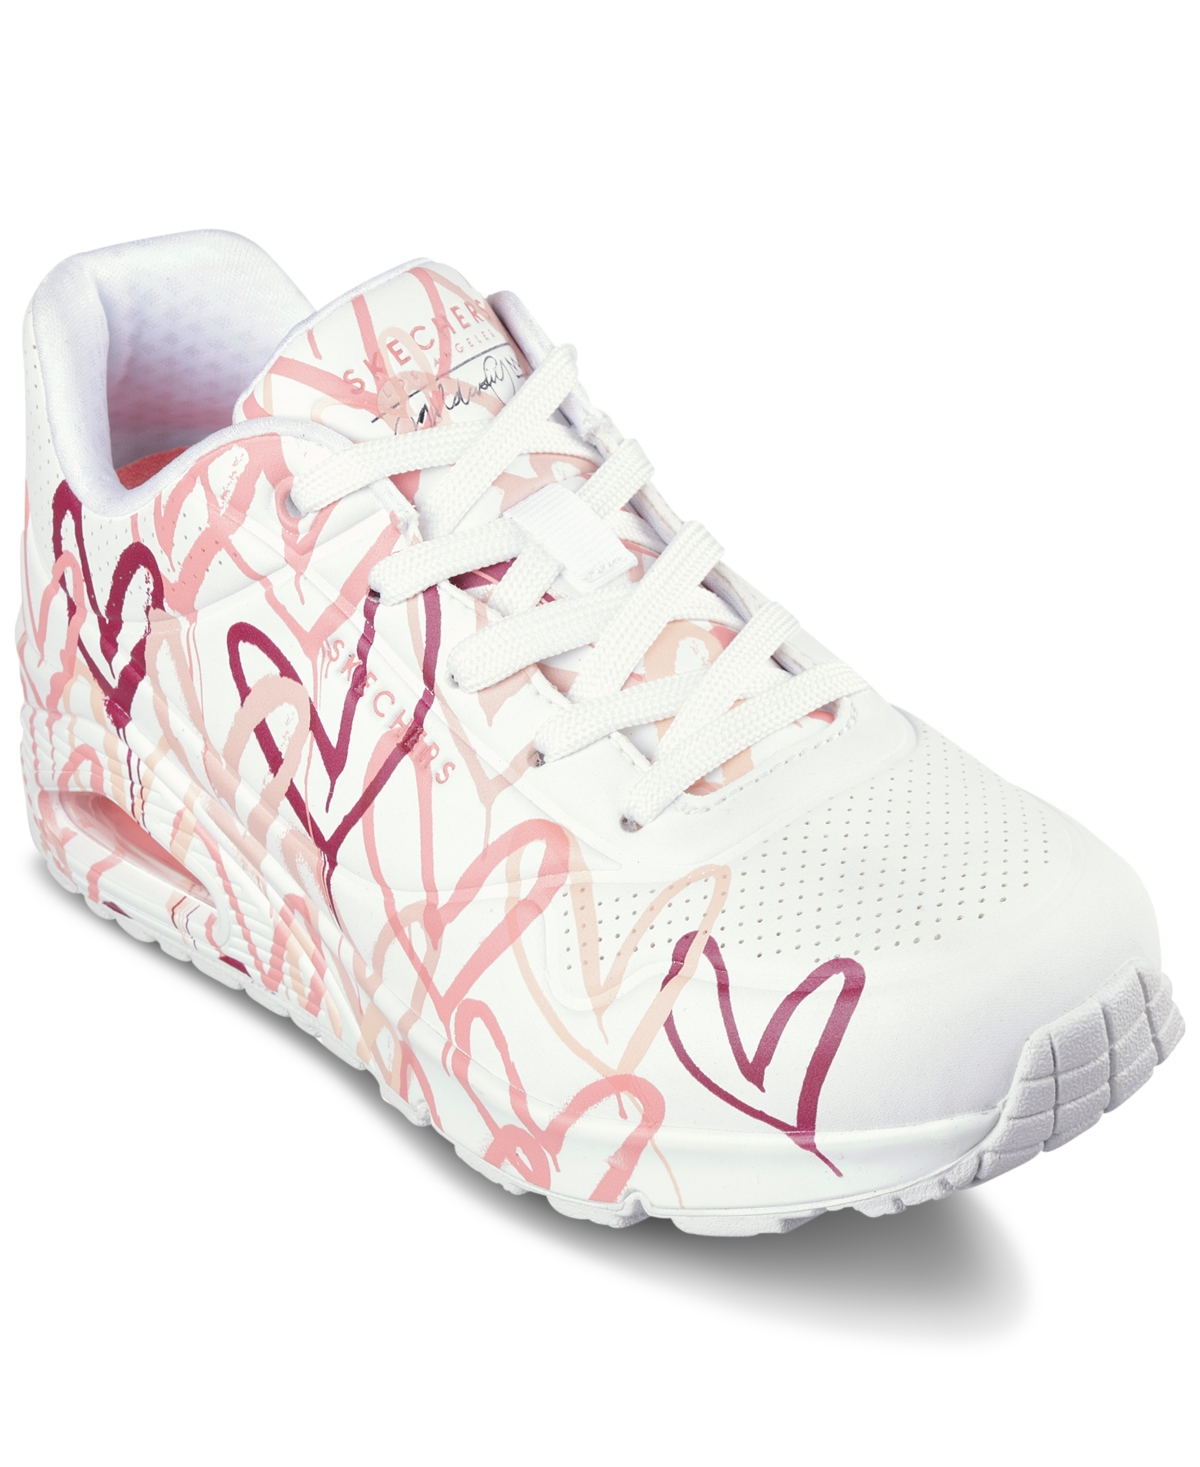 Women's JGoldcrown- Skechers Street Uno - Spread the Love Casual Sneakers from Finish Line - White, Coral